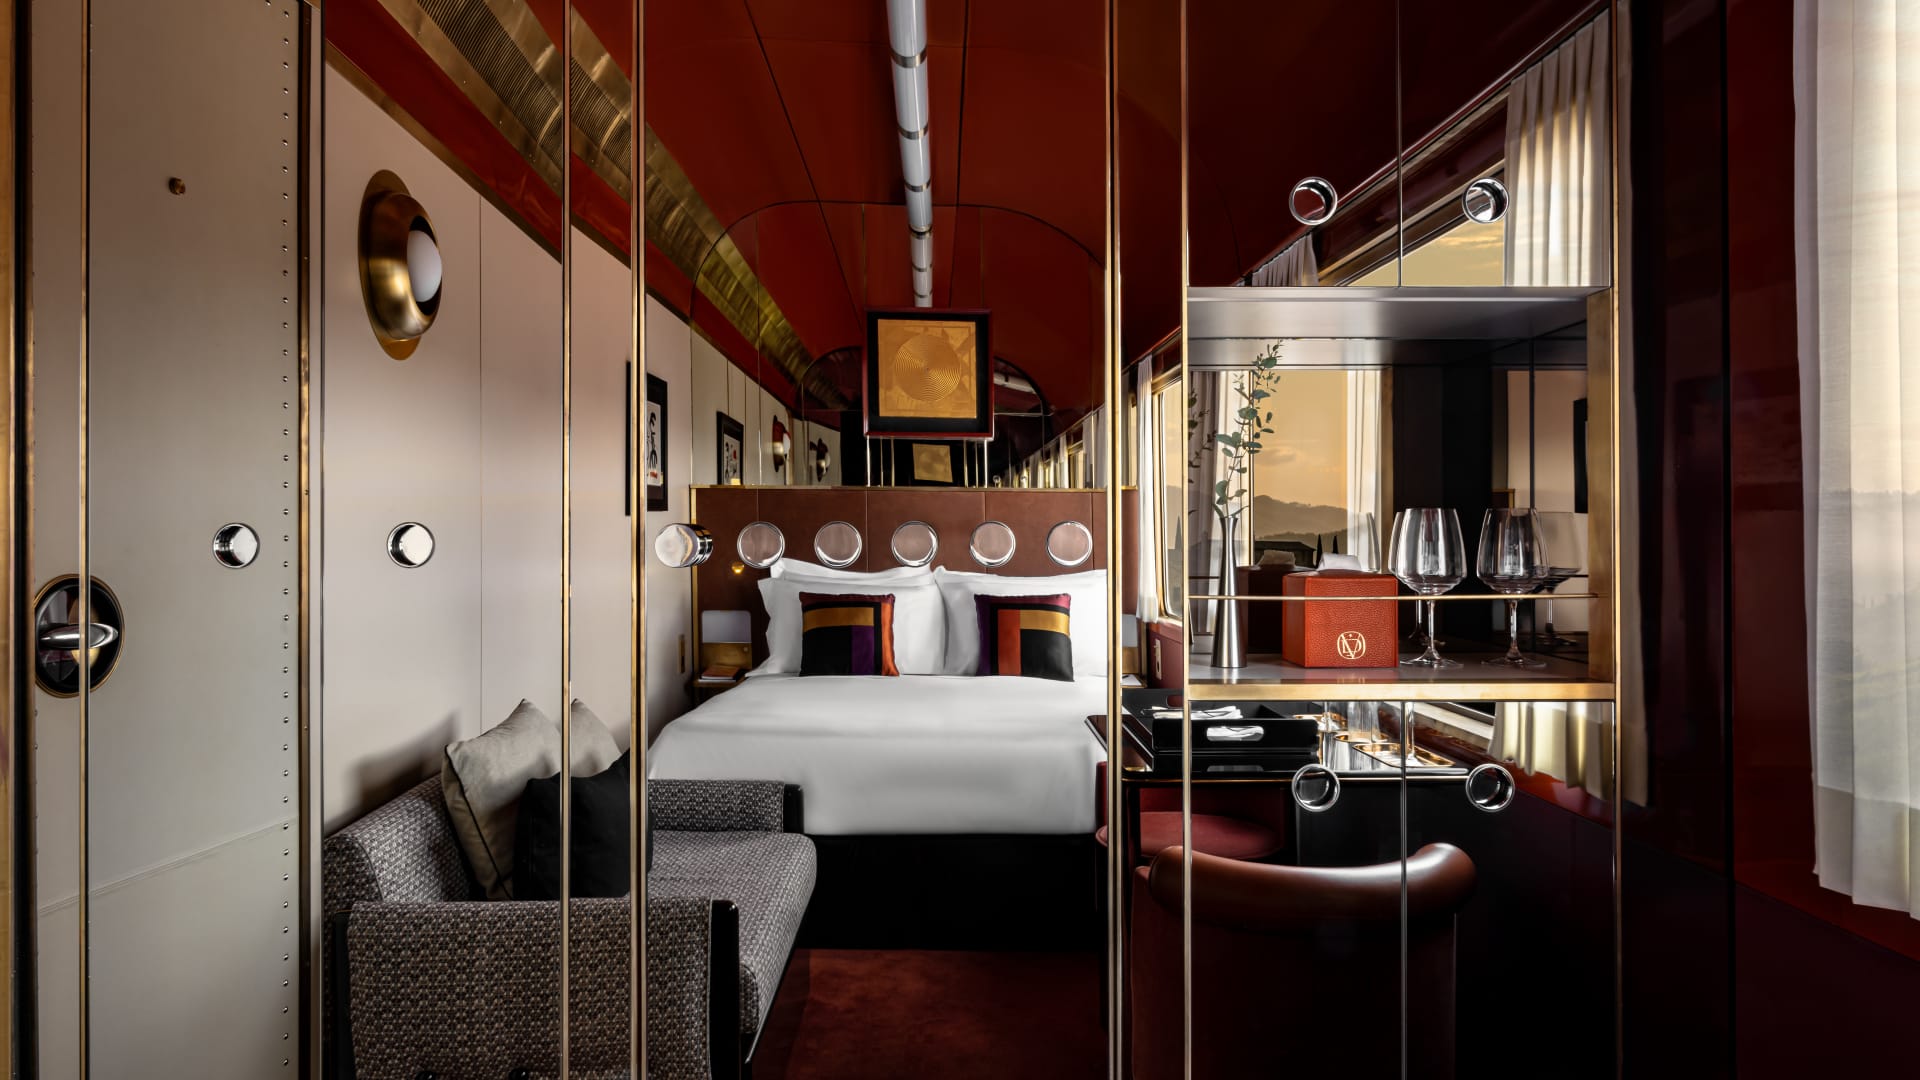 La Dolce Vita Orient Express train: What a one-night journey costs [Video]